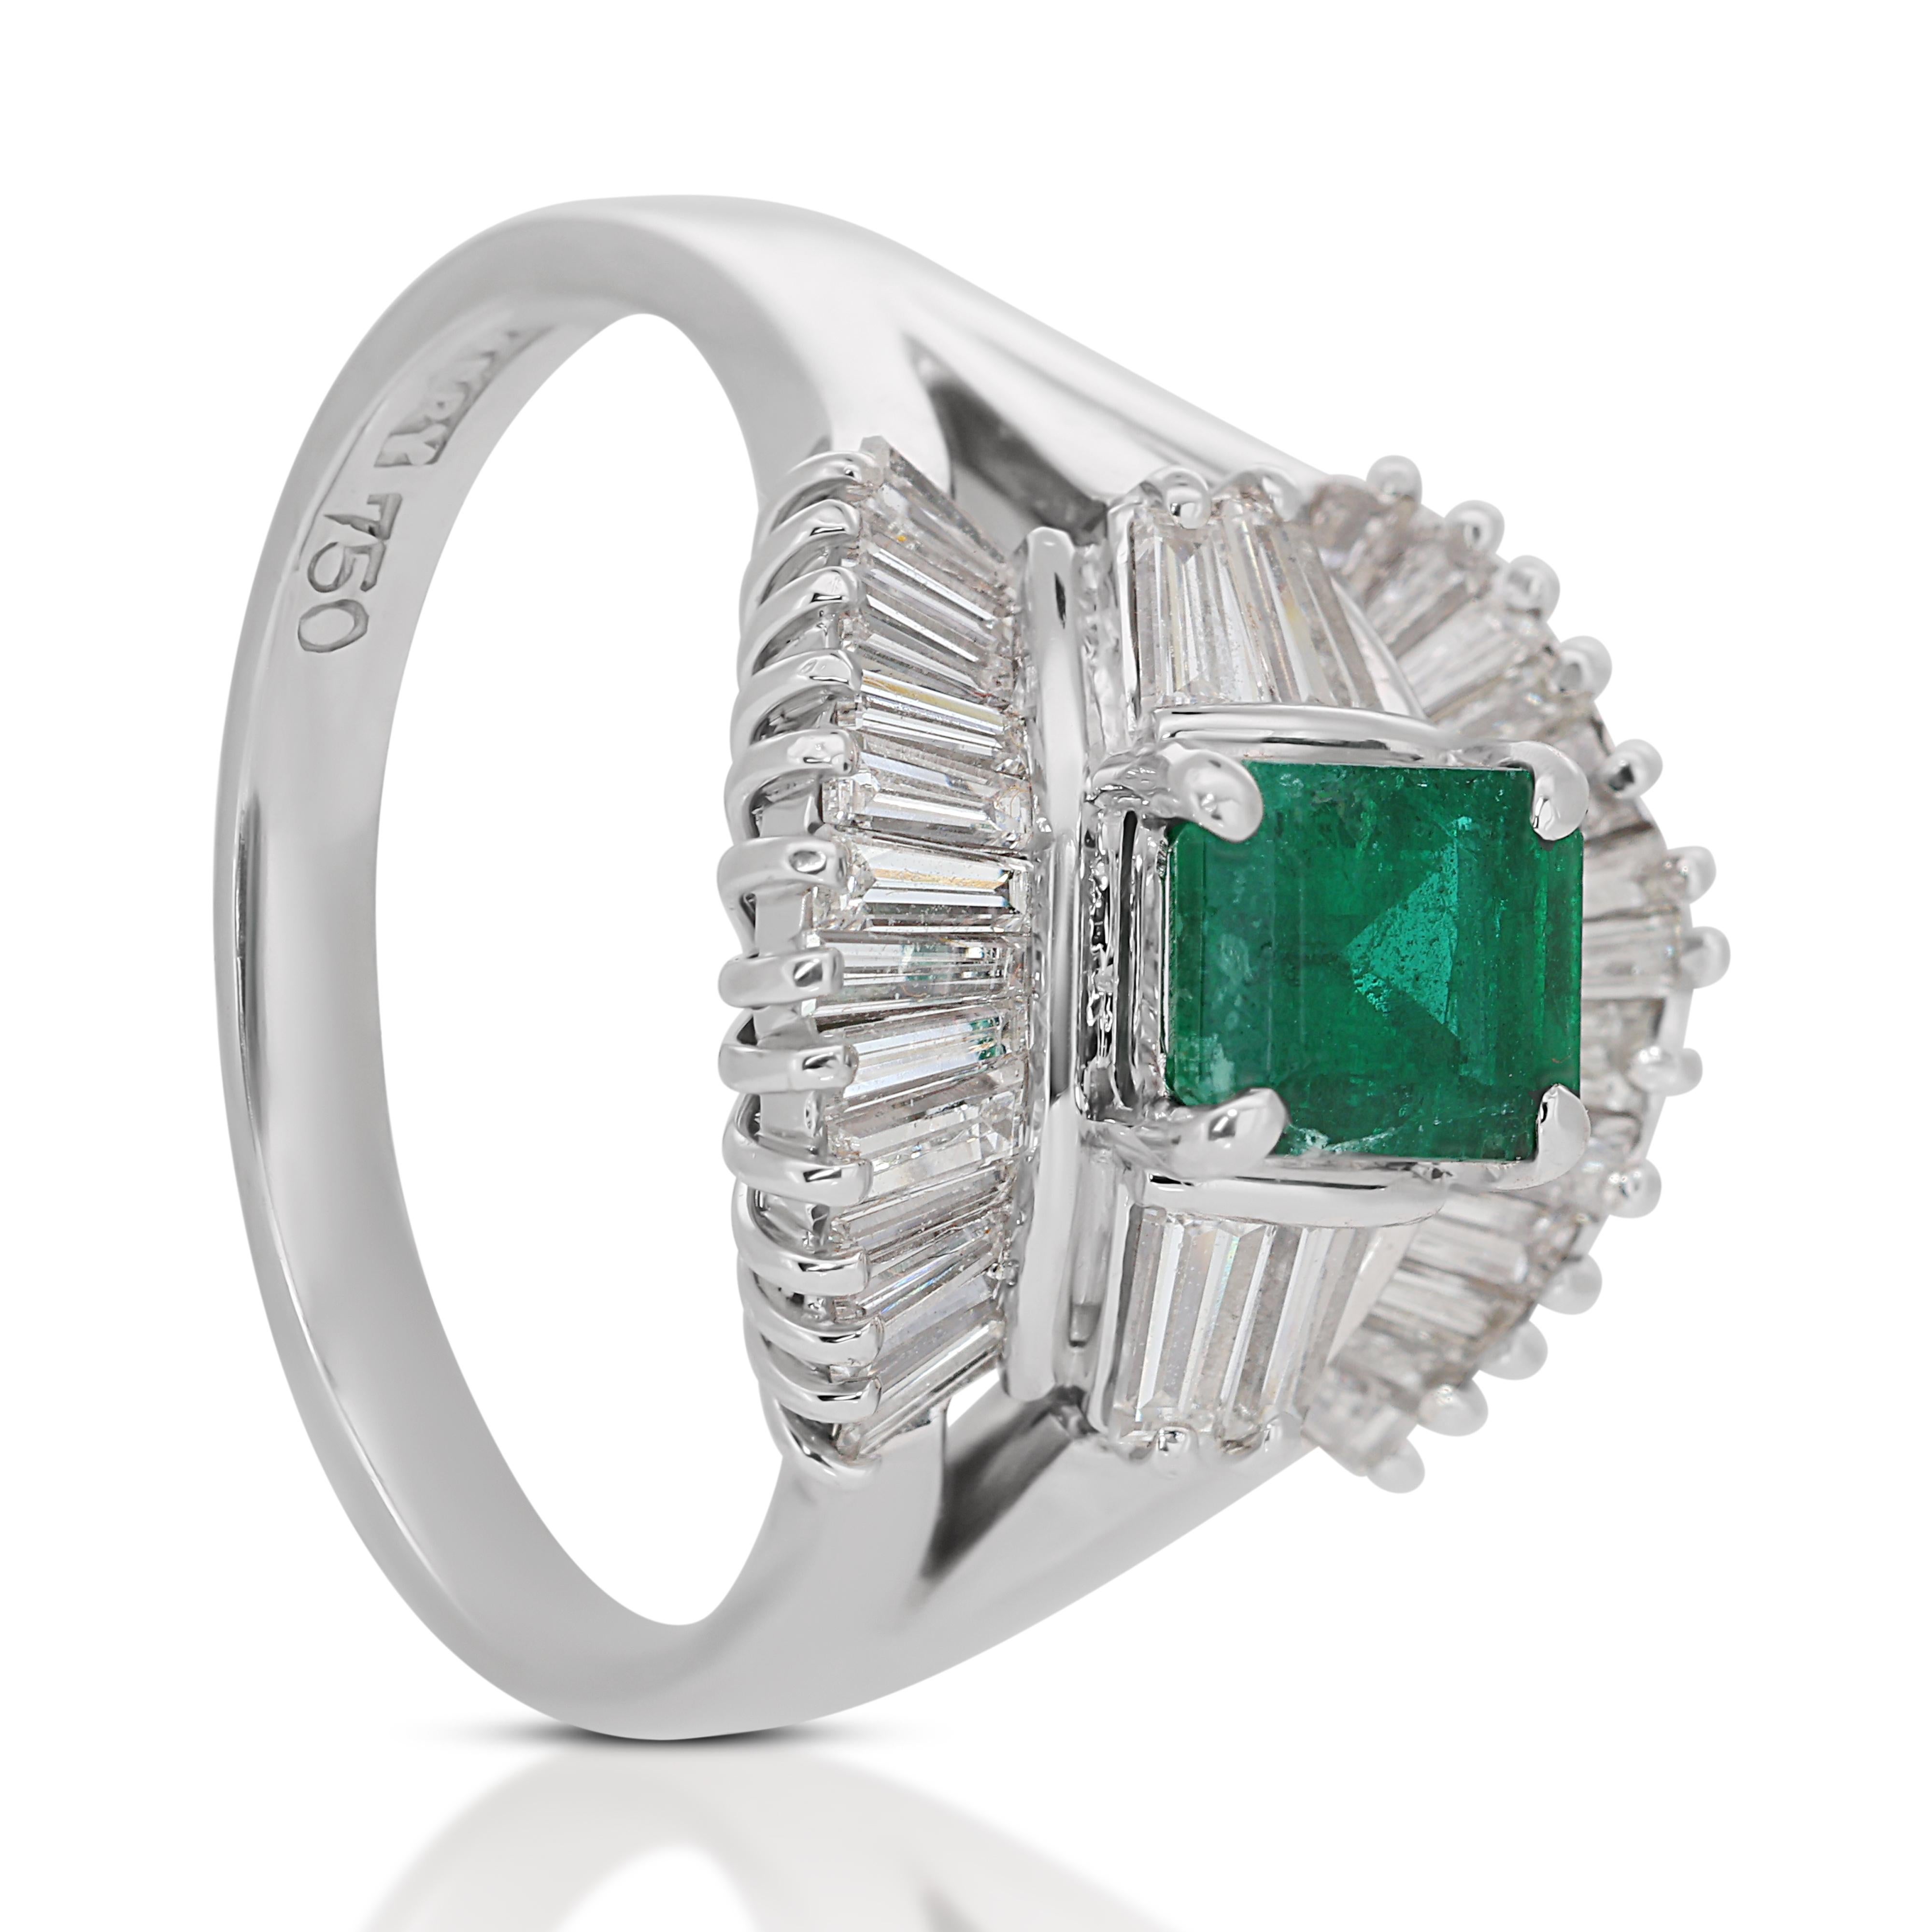 Radiant 18k White Gold Emerald and Diamond Halo Ring w/2.08 ct  - IGI Certified

Unveil the elegance of this 18k White Gold Halo Ring that perfectly matches the allure of a classic gem with contemporary design. At its heart, a striking 0.70 ct